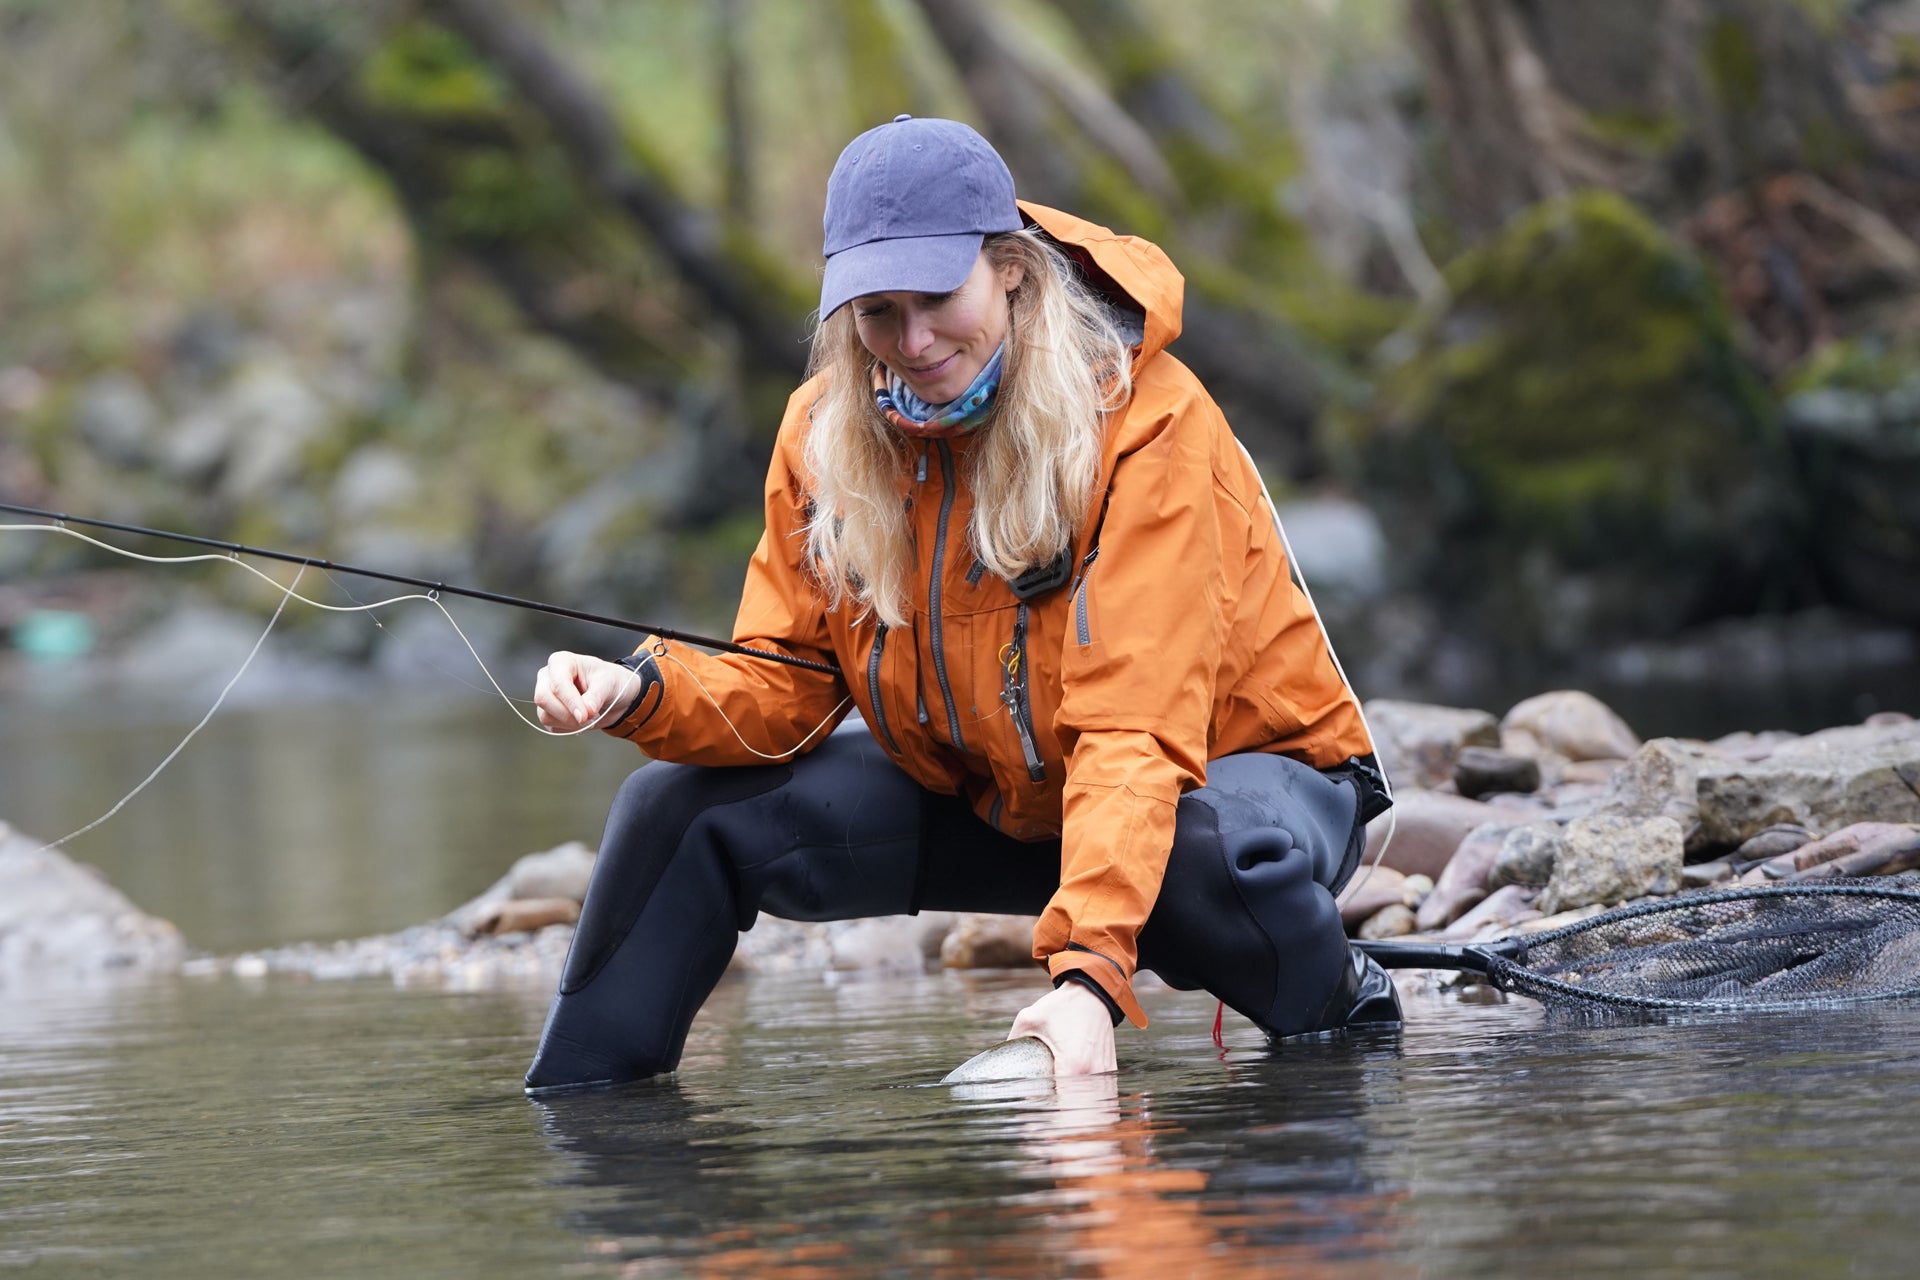 Saltwater Fly Fishing Equipment - United Women on the Fly